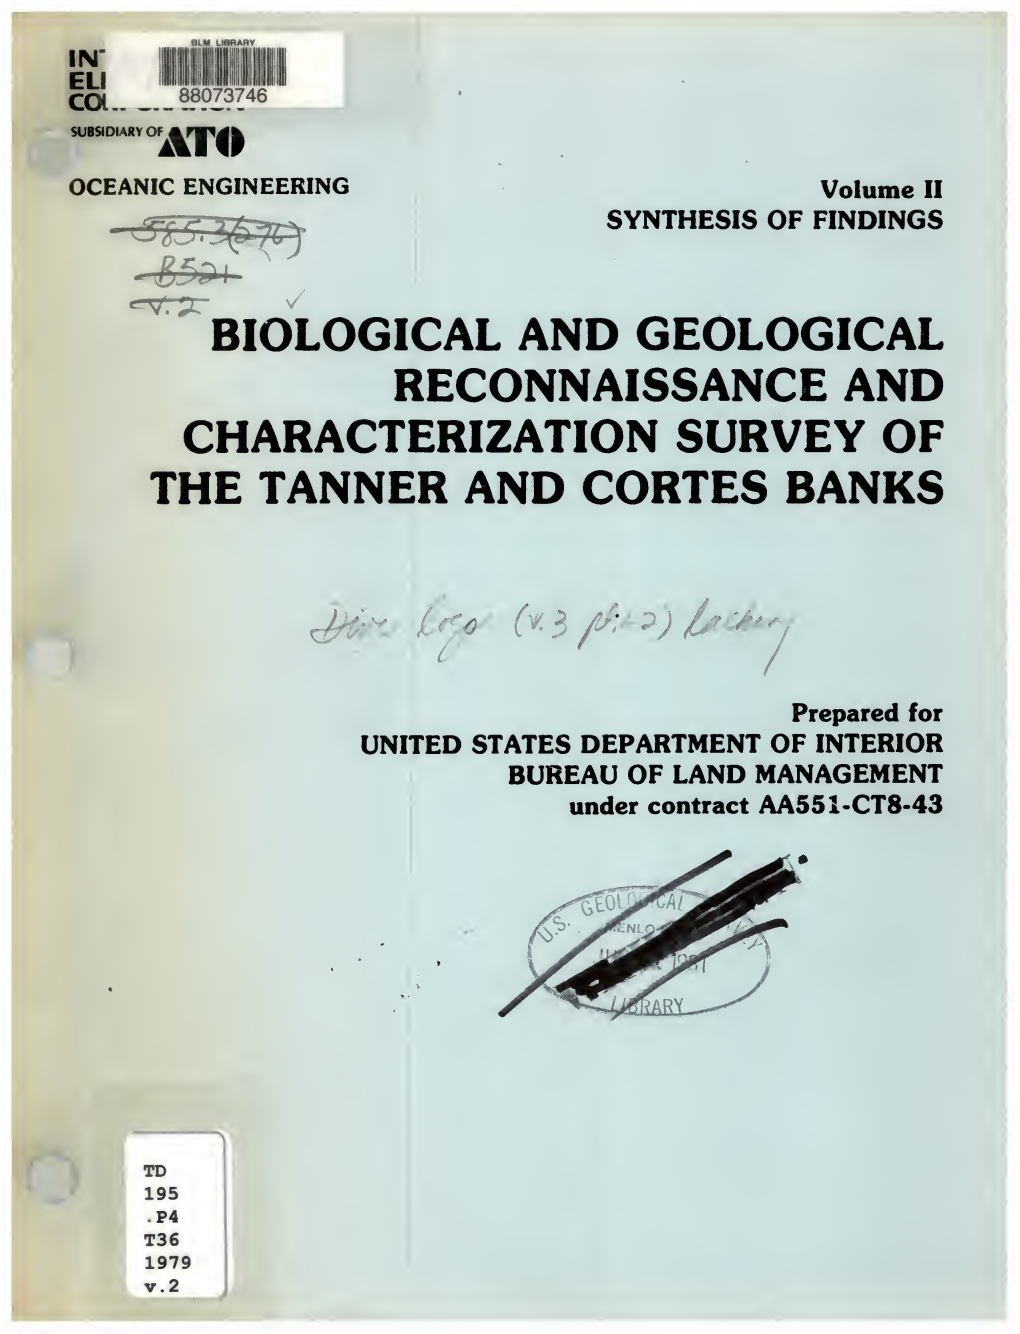 Biological and Geological Reconnaissance and Characterization Survey of the Tanner and Cortes Banks